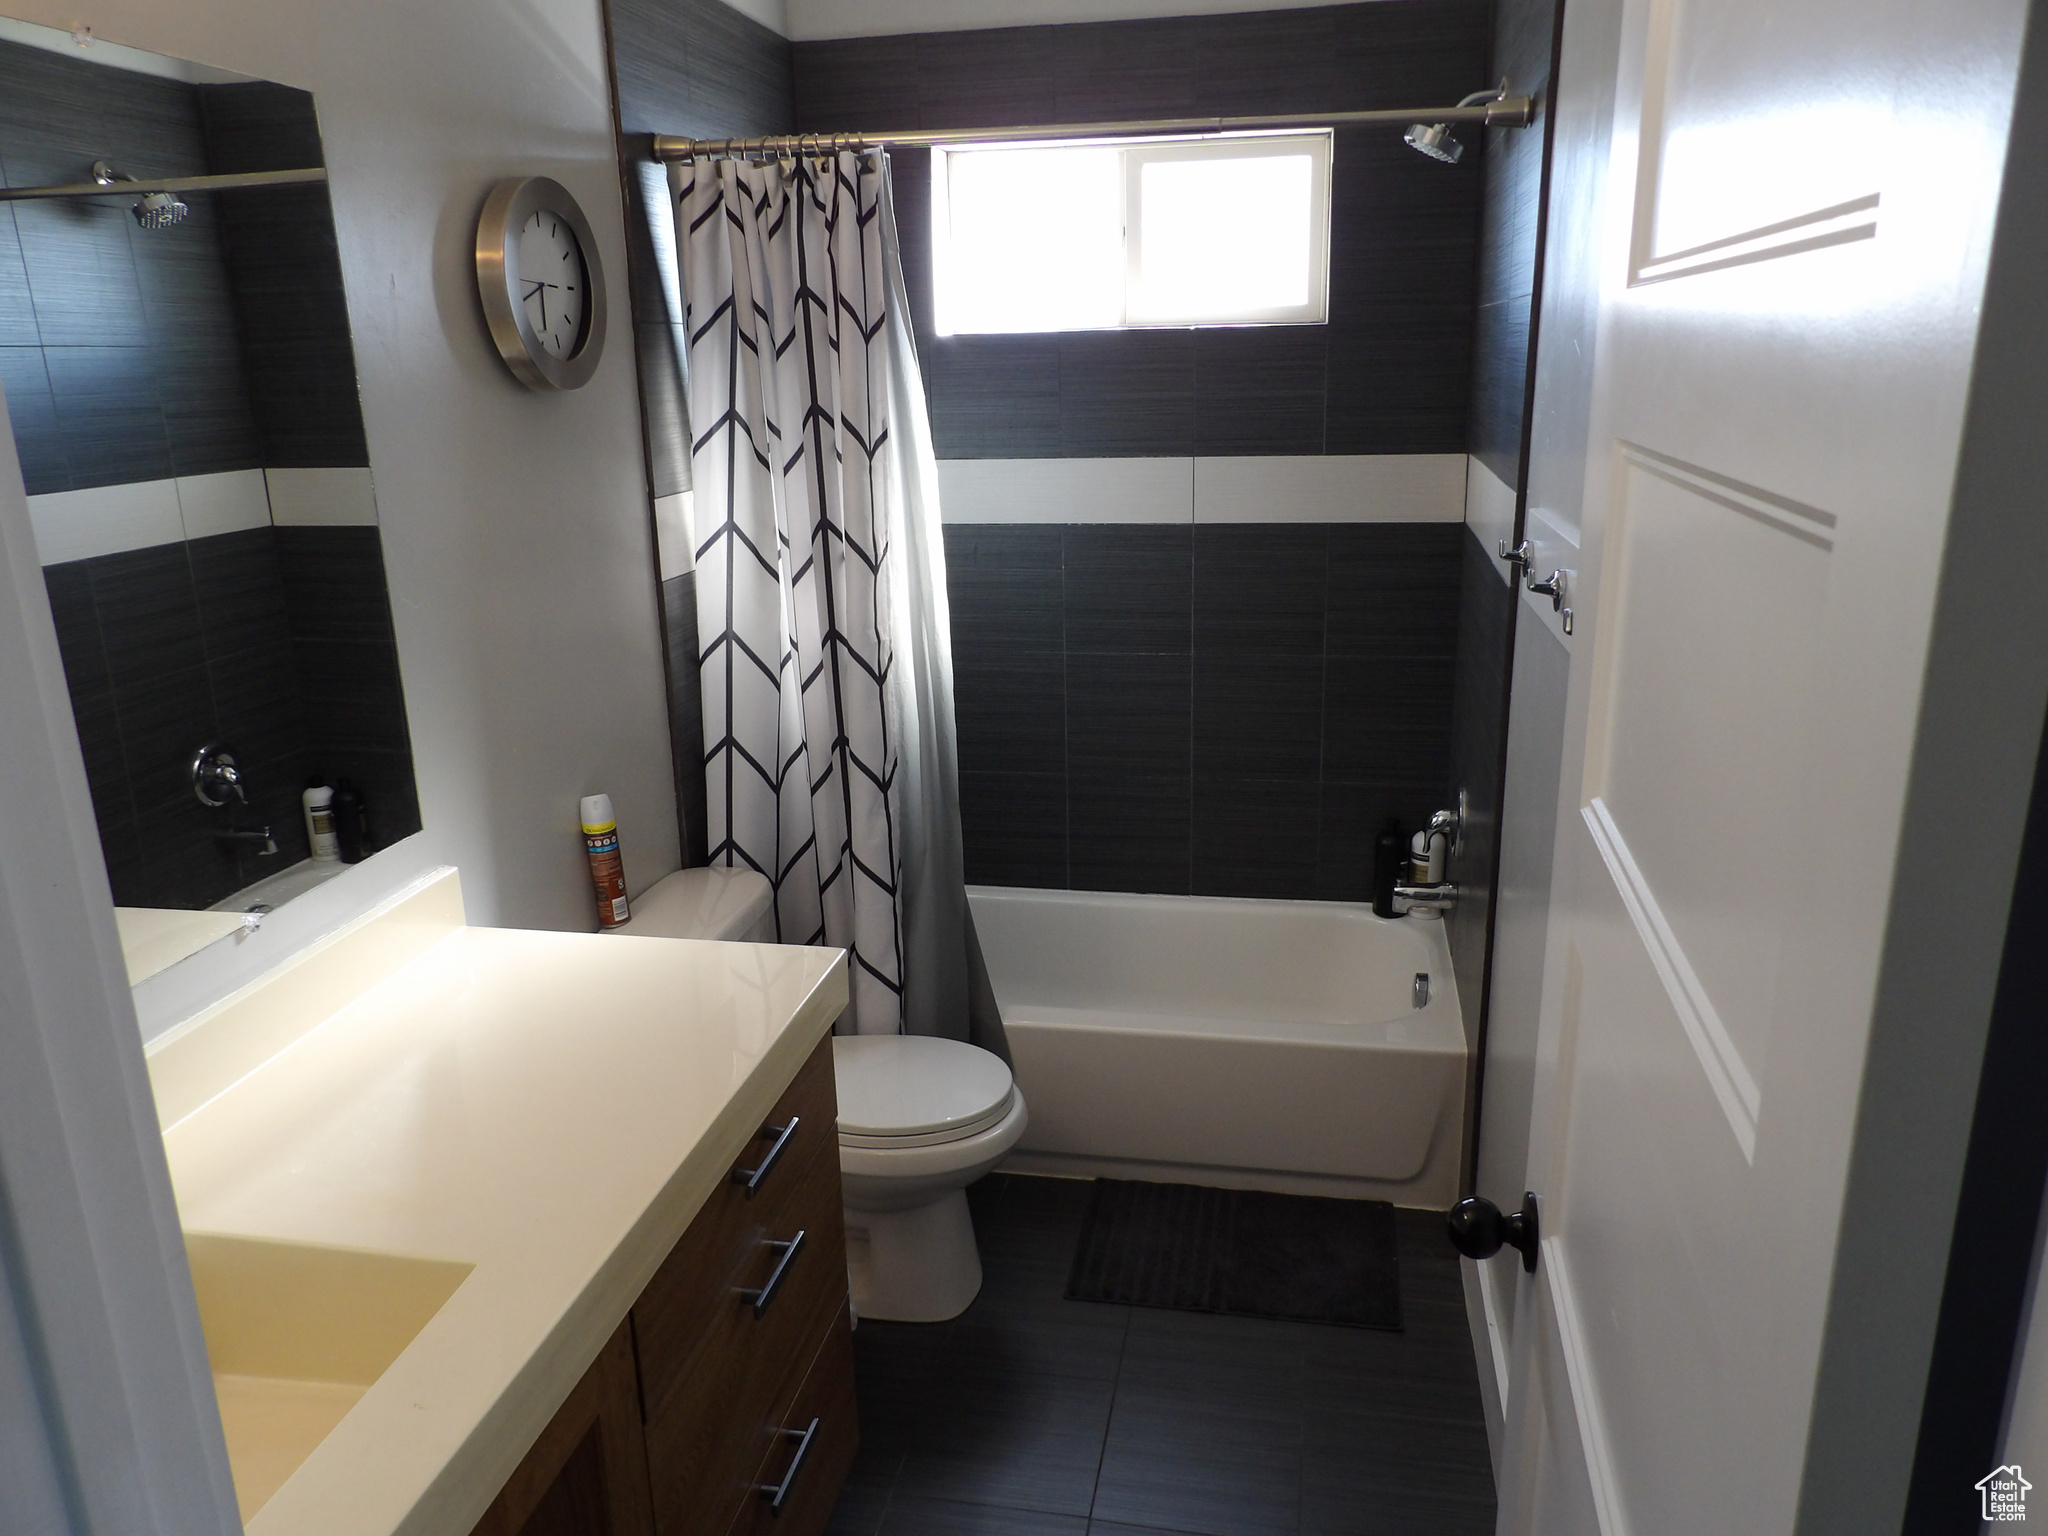 Full bathroom featuring tile flooring, large vanity, shower / tub combo with curtain, and toilet